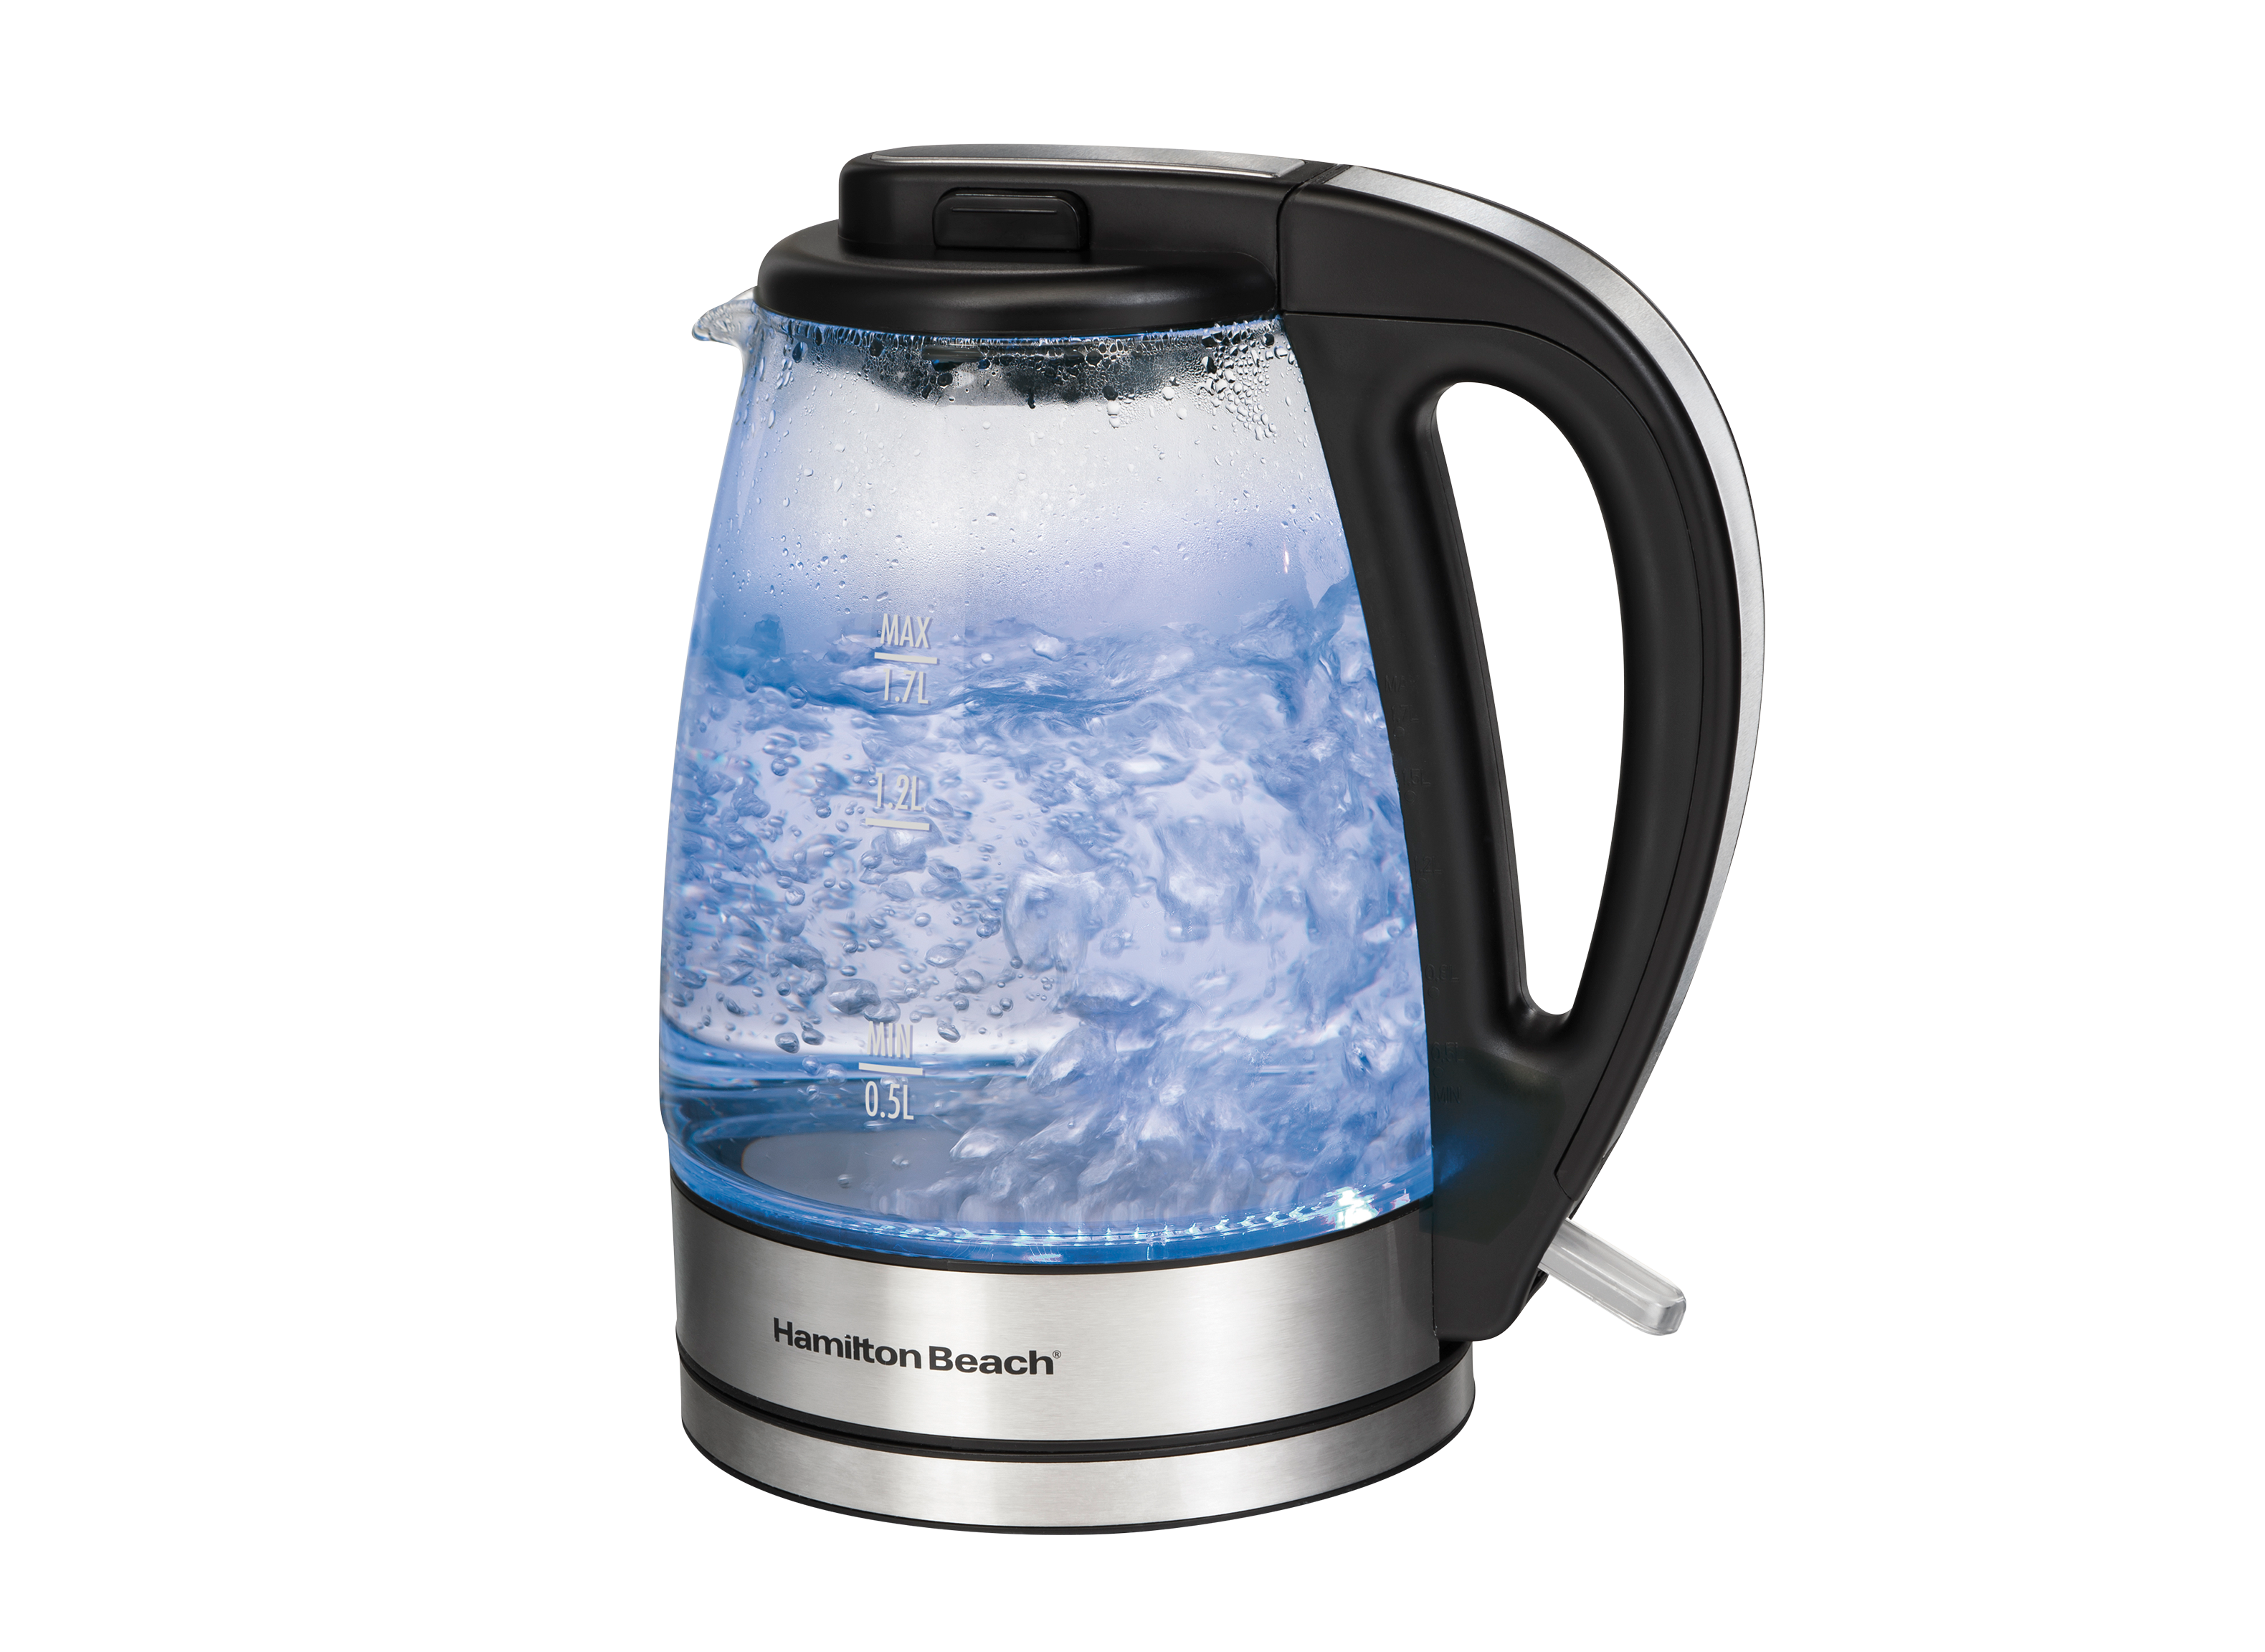 https://crdms.images.consumerreports.org/prod/products/cr/models/398976-electric-kettles-hamilton-beach-1-7-liter-glass-kettle-40865-10006671.png